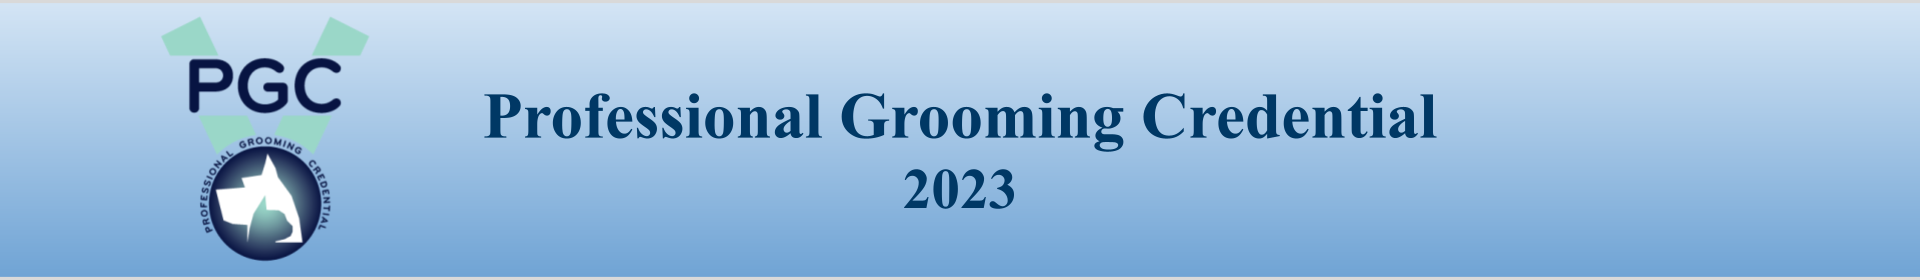 Professional Grooming Credential (PGC) 2023 Event Banner